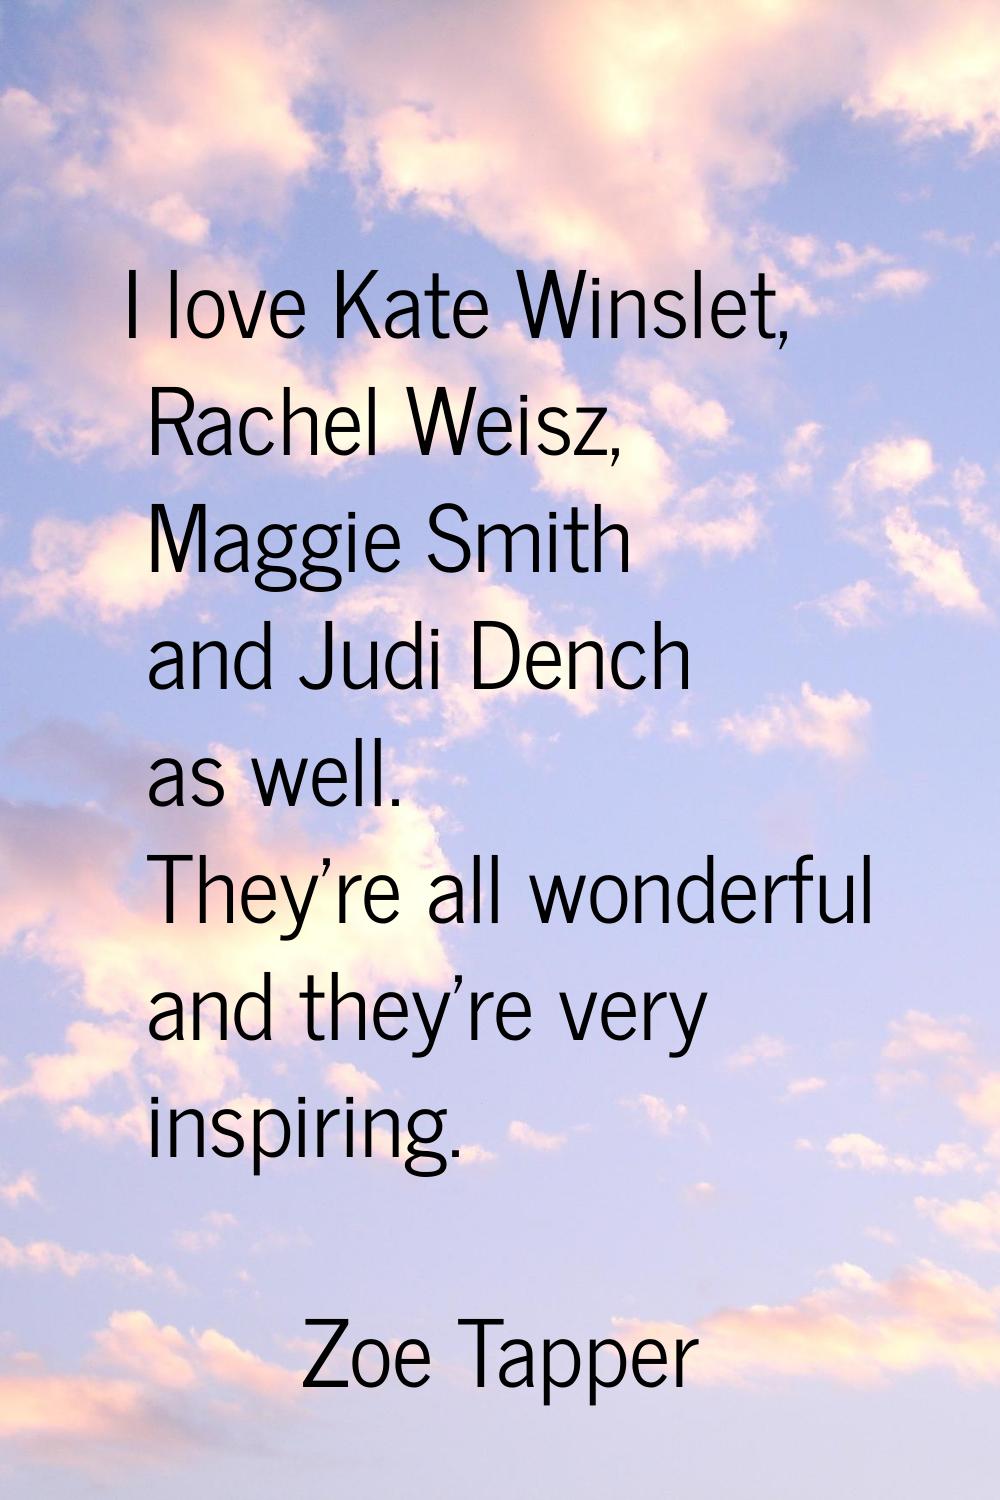 I love Kate Winslet, Rachel Weisz, Maggie Smith and Judi Dench as well. They're all wonderful and t